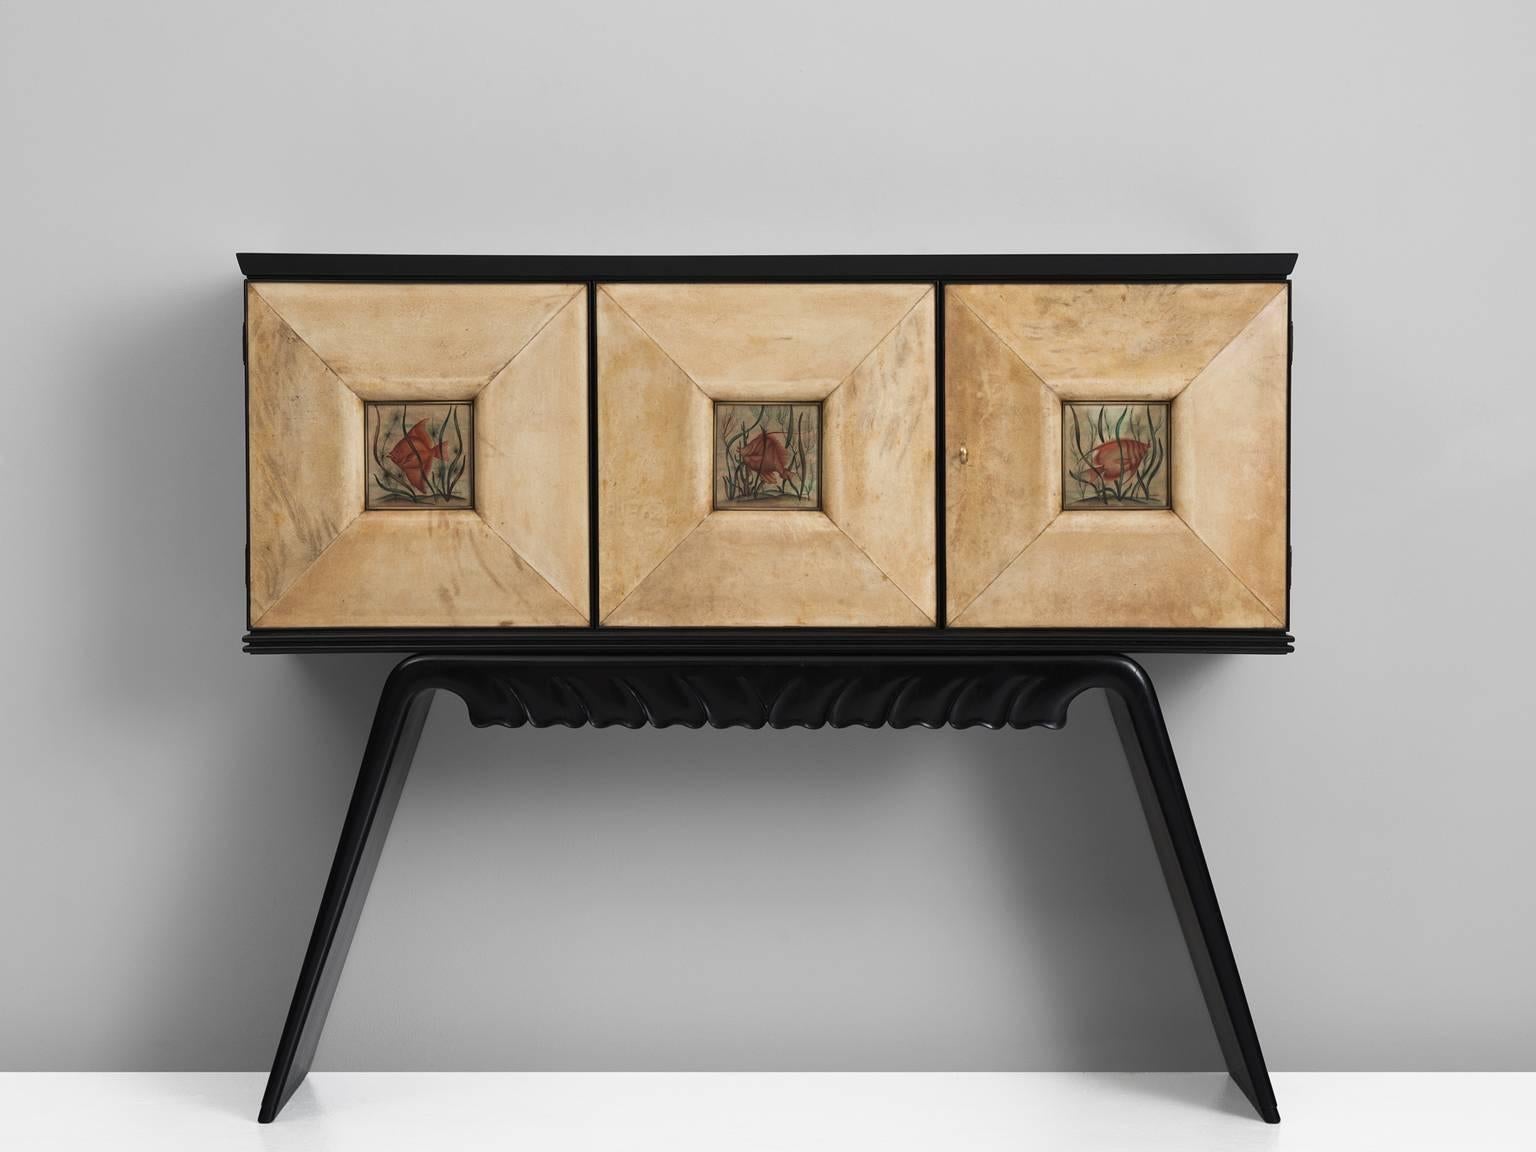 Bar cabinet, in wood, glass and goatskin, Italy, 1950s.

Beautiful bar cabinet in characteristic Italian style of Paolo Buffa, Vittorio Dassi and Osvaldo Borsani. This bar has a very luxurious appearance, due the use of not common materials. The